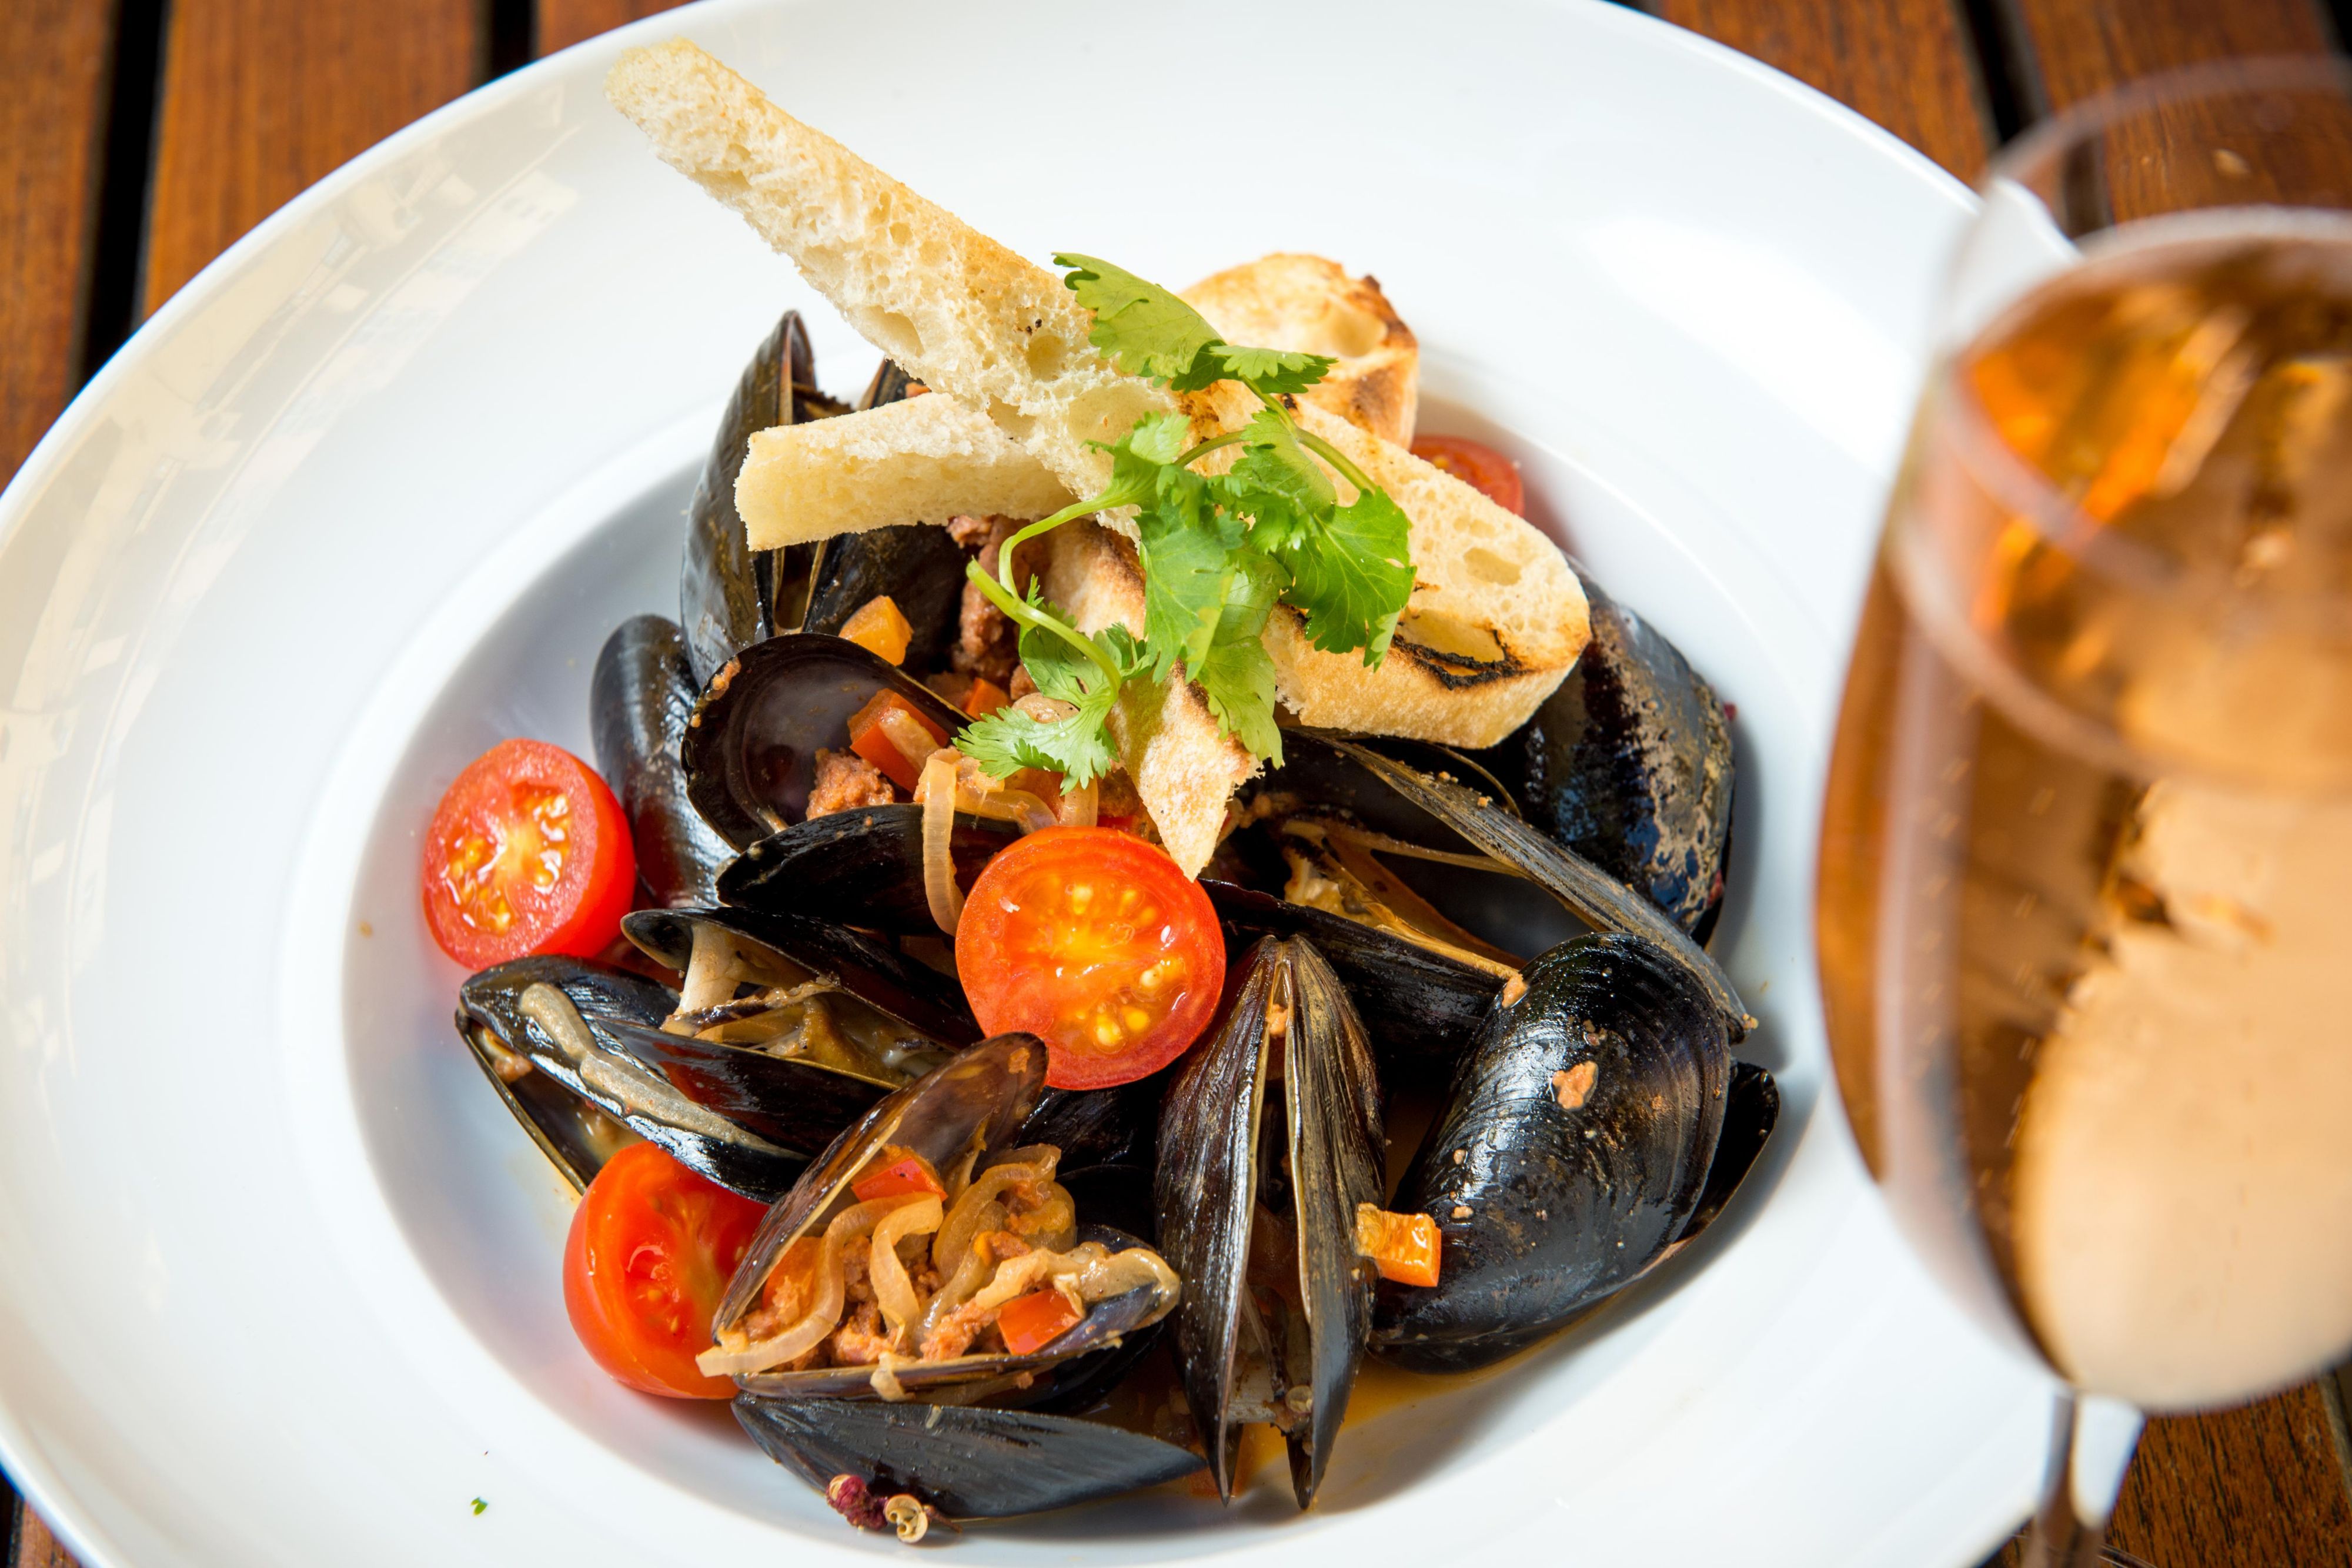 Indulge in the flavors of Palo Alto at 4290 Bistro &amp; Bar